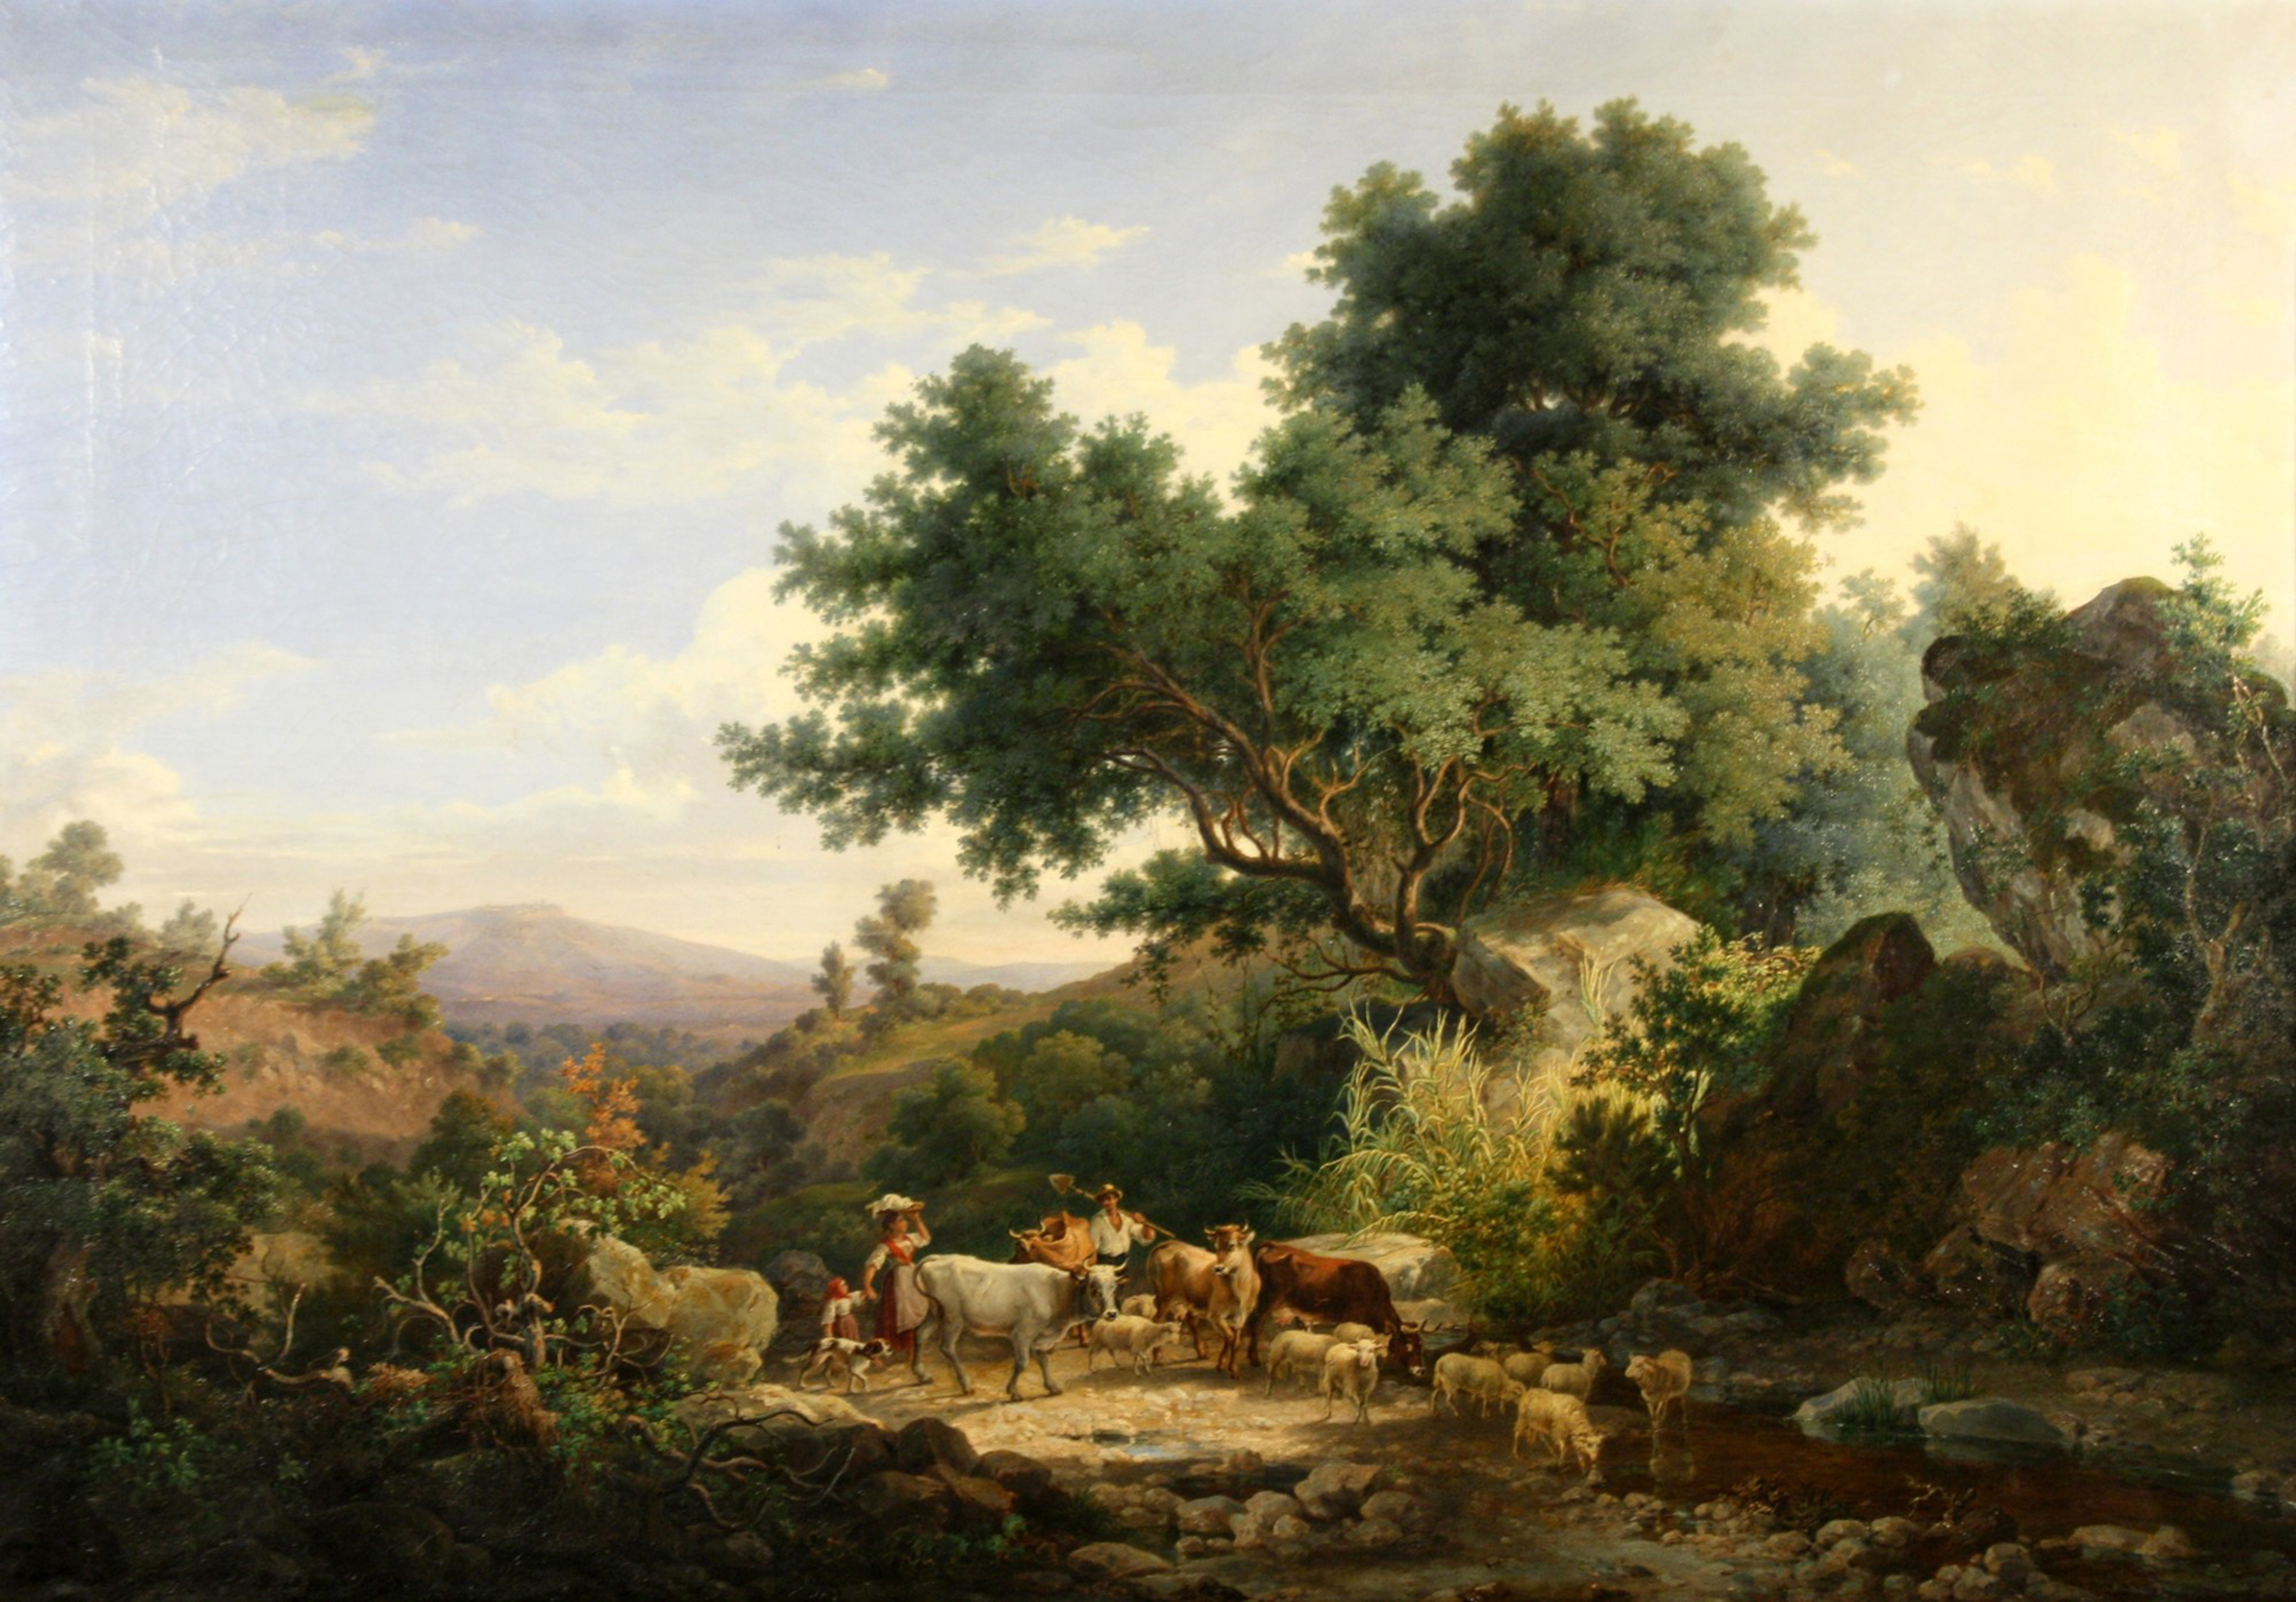 PIETRO DELLA VALLE Painting ''LANDSCAPE WITH SHEPHERDS AND ARMMENTS'' - Image 2 of 4